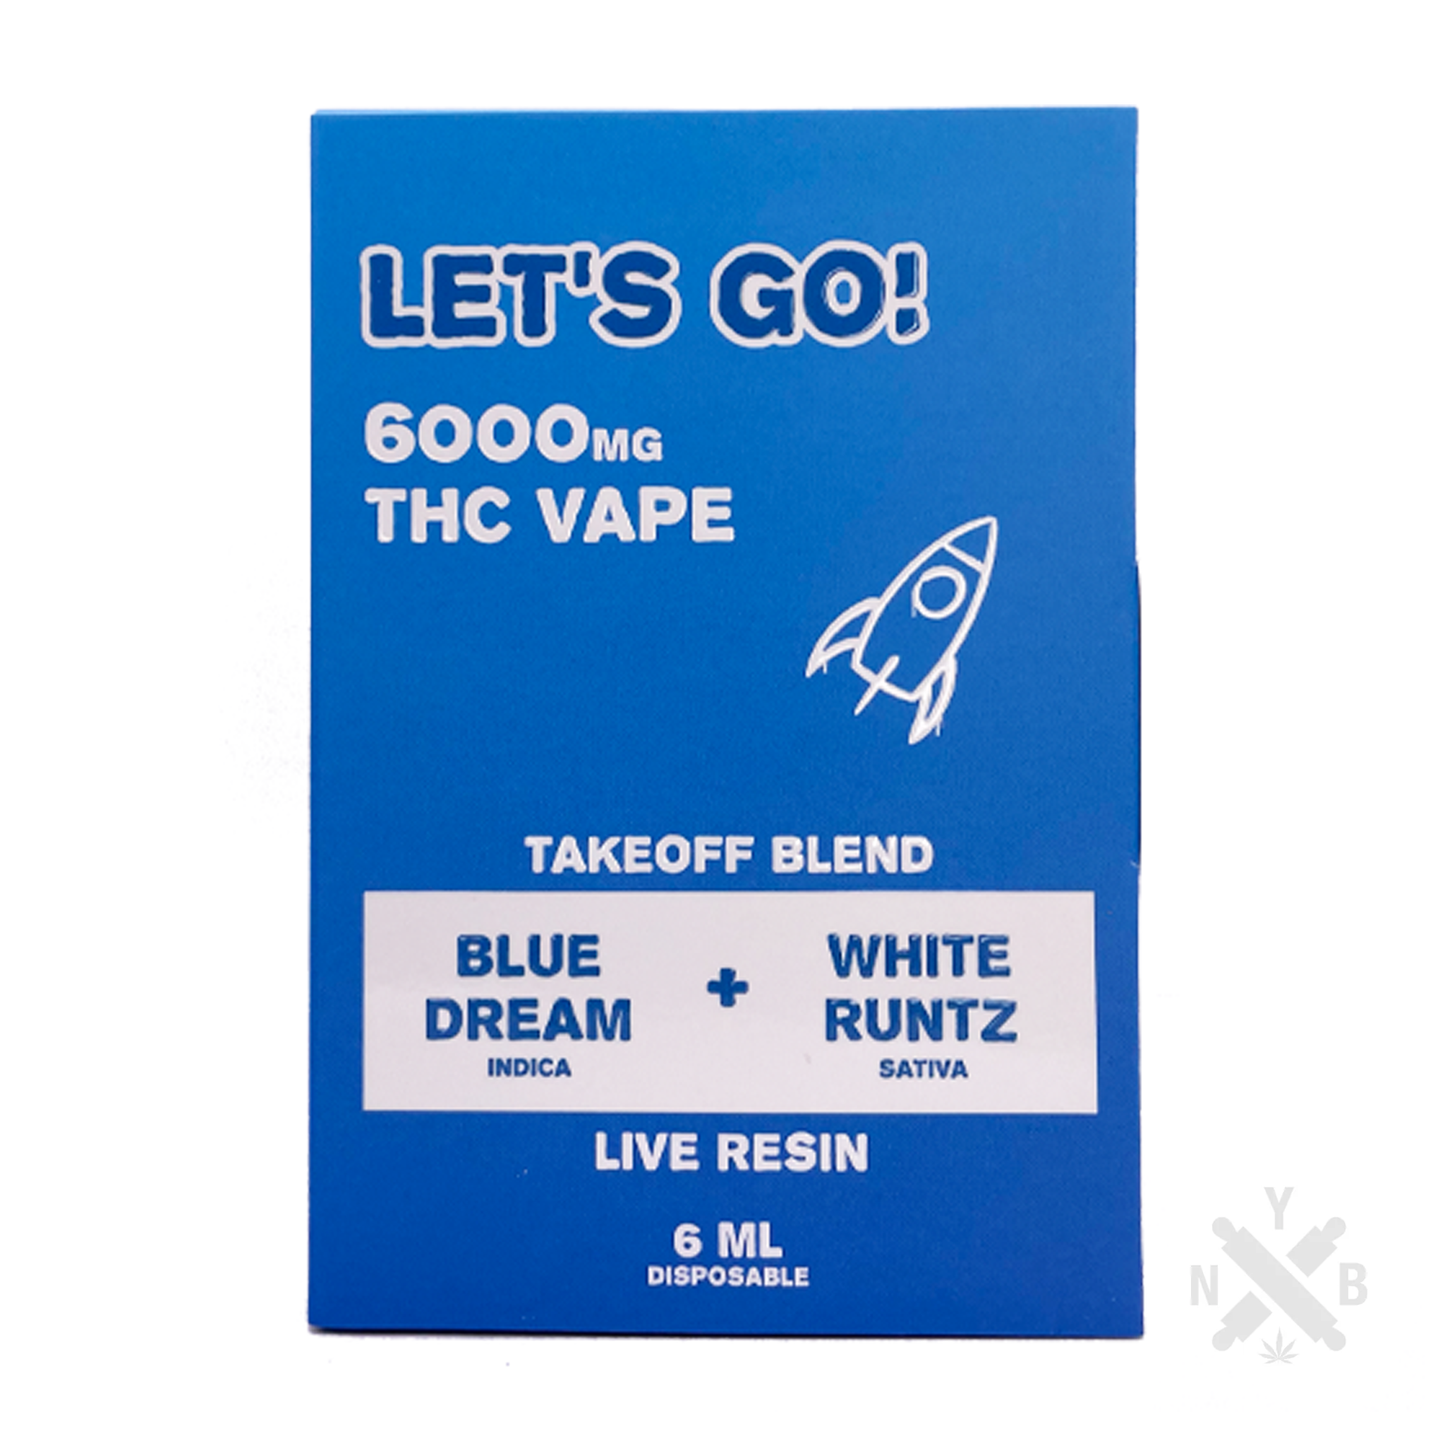 Let's Go! 6000mg Takeoff Blend THC | 6ml Disposable